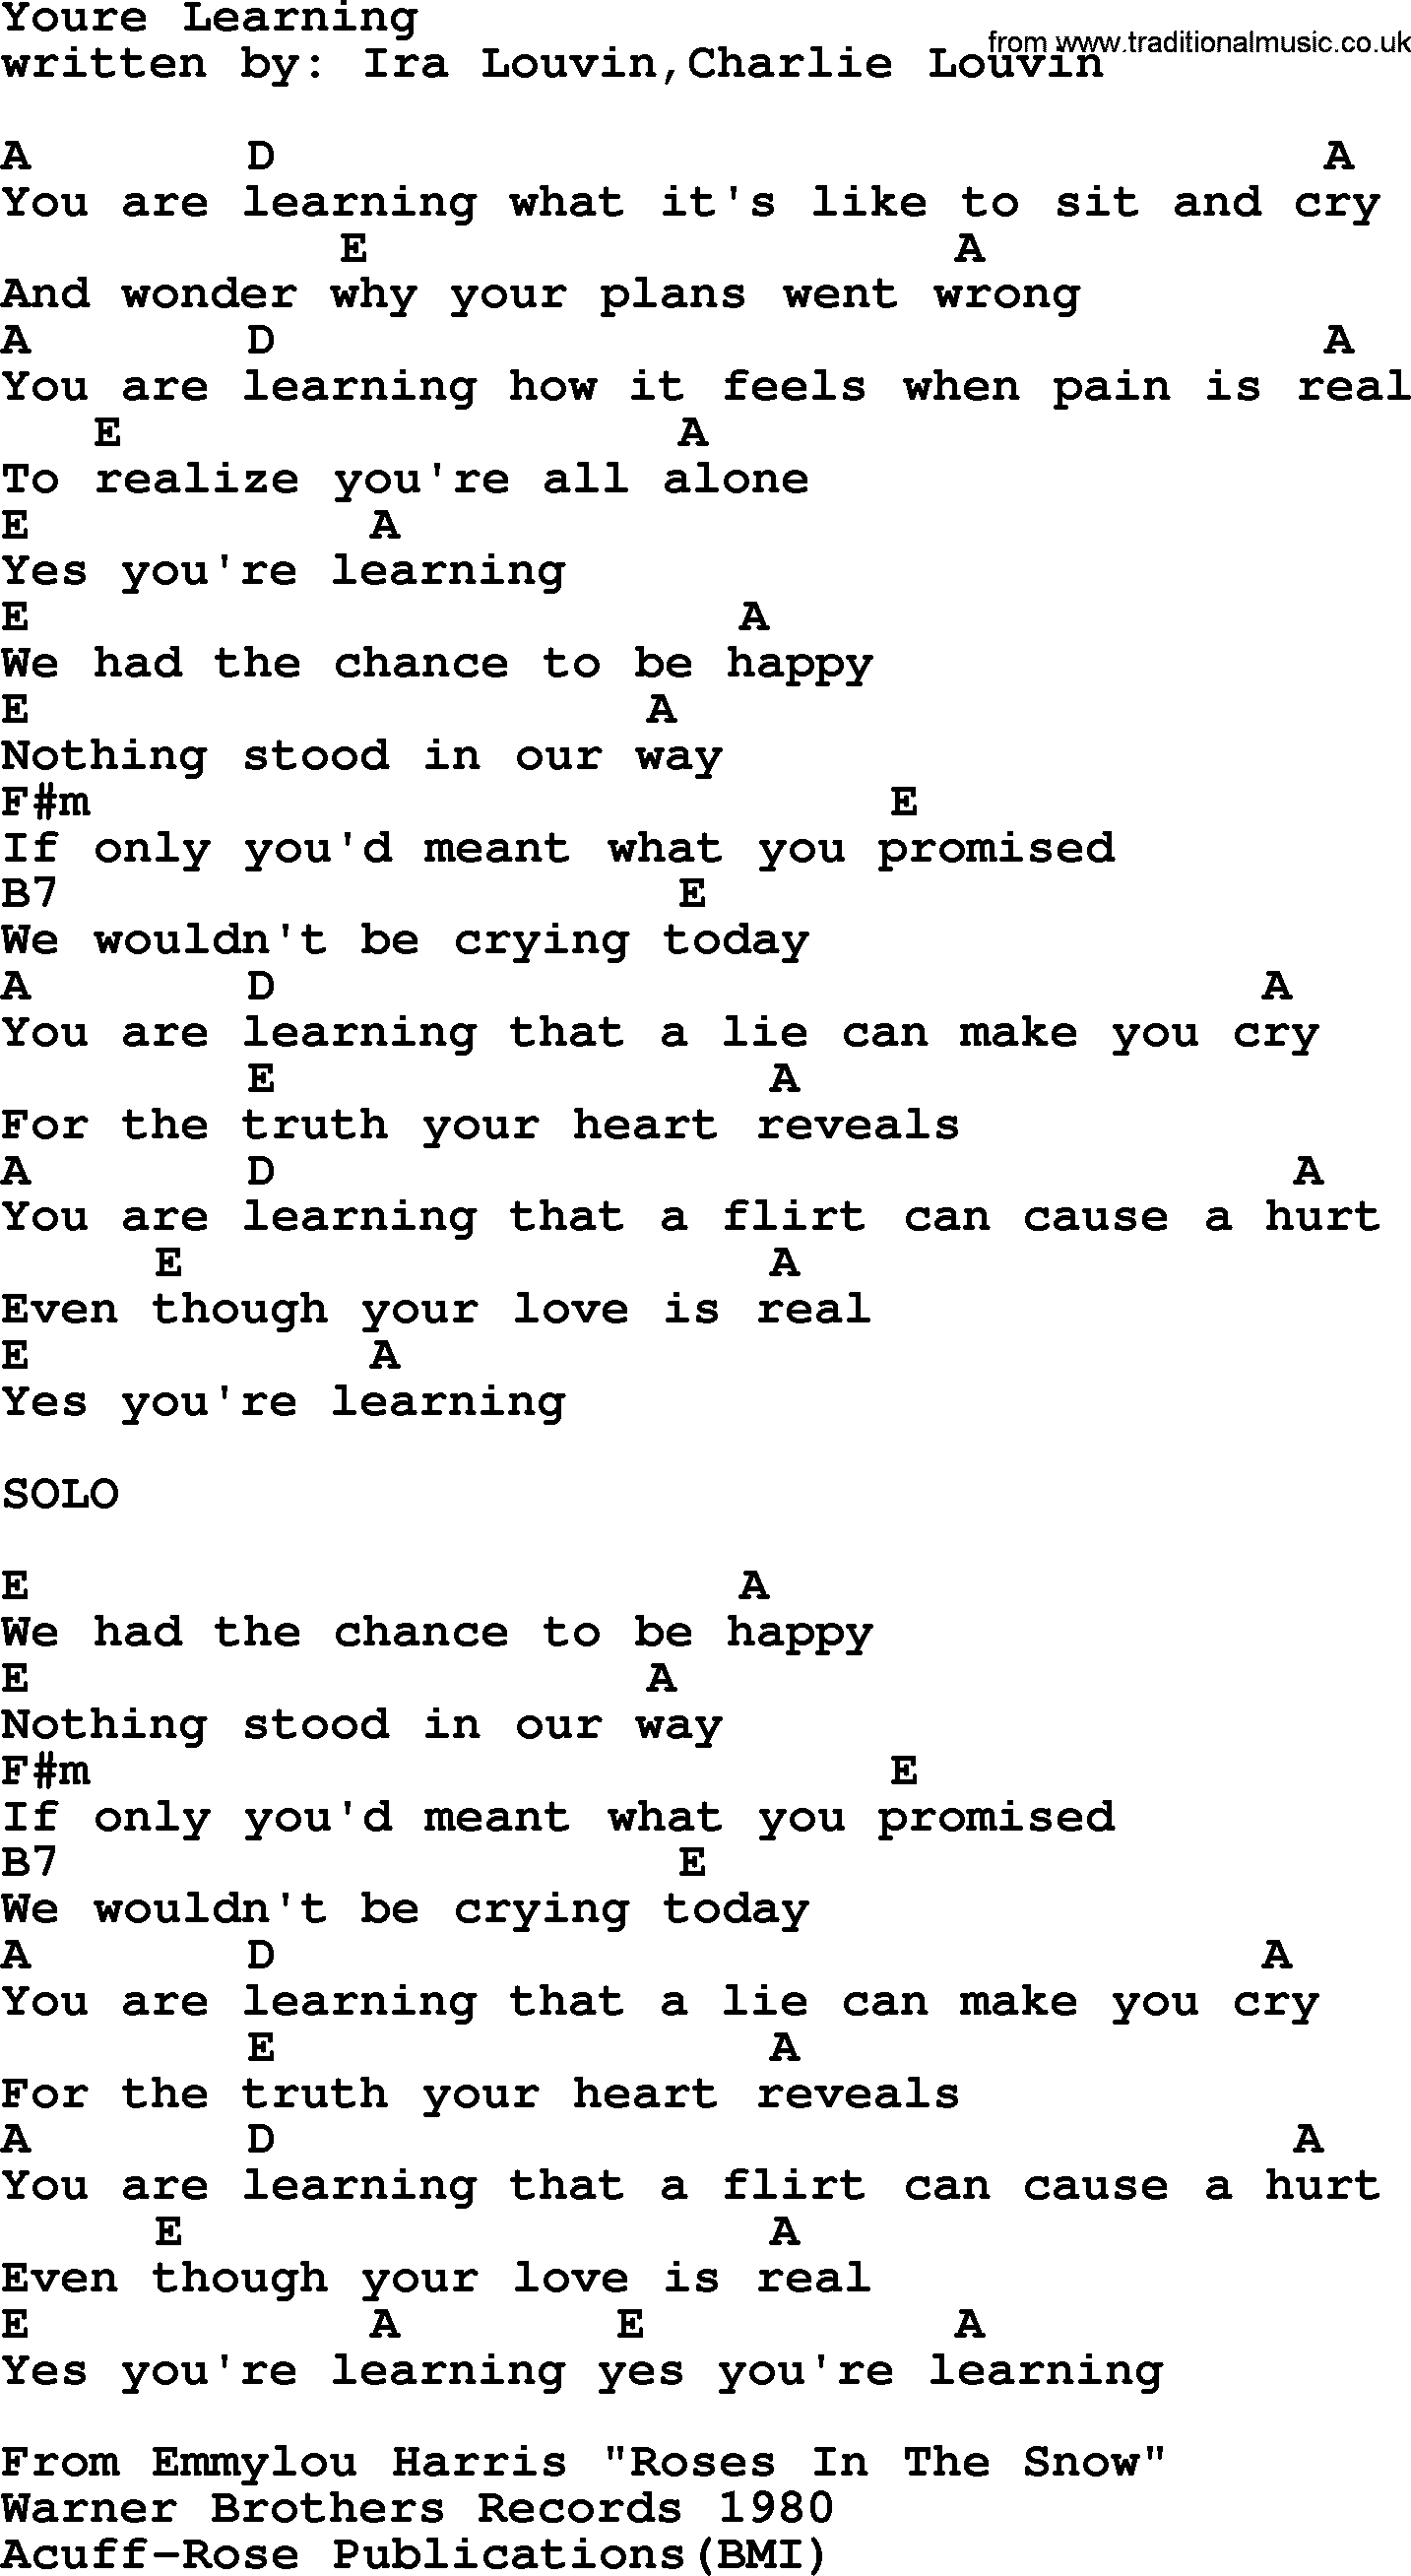 Emmylou Harris song: Youre Learning lyrics and chords